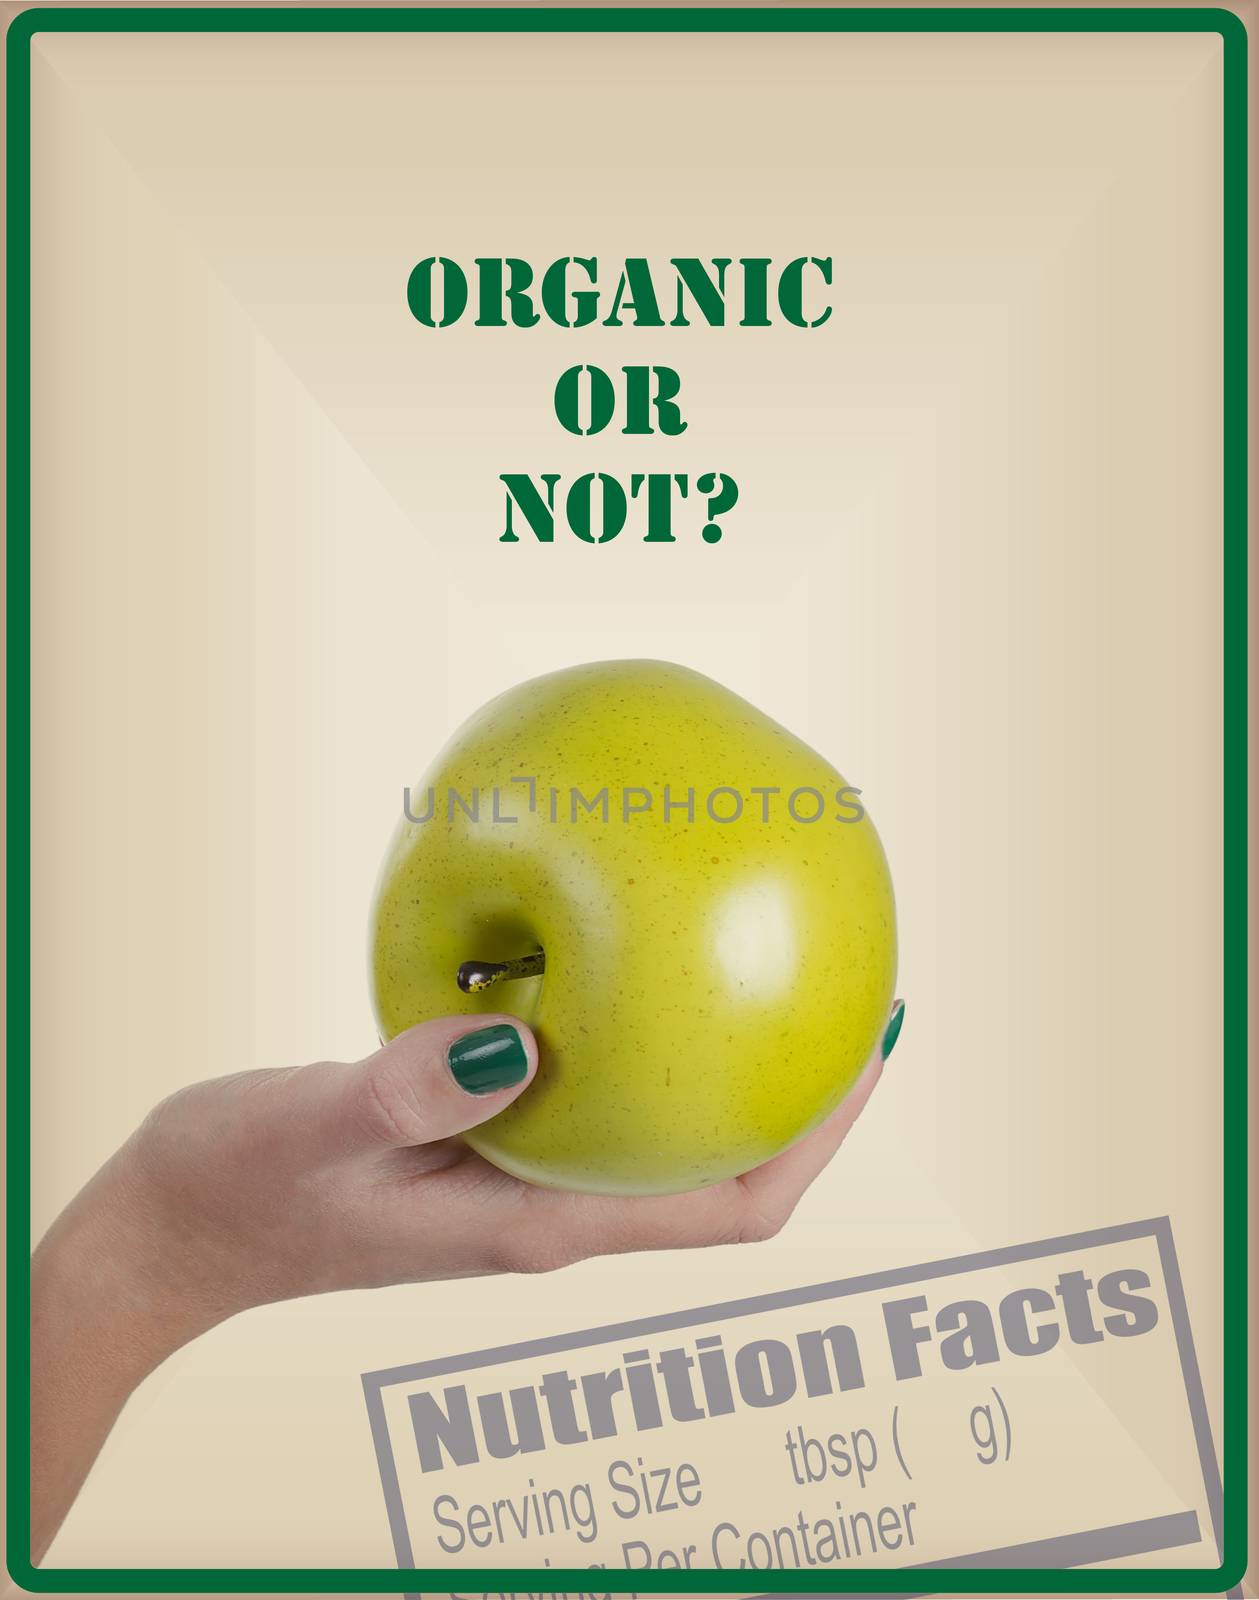 A female hand holds a green apple and asks whether it is organic or not?